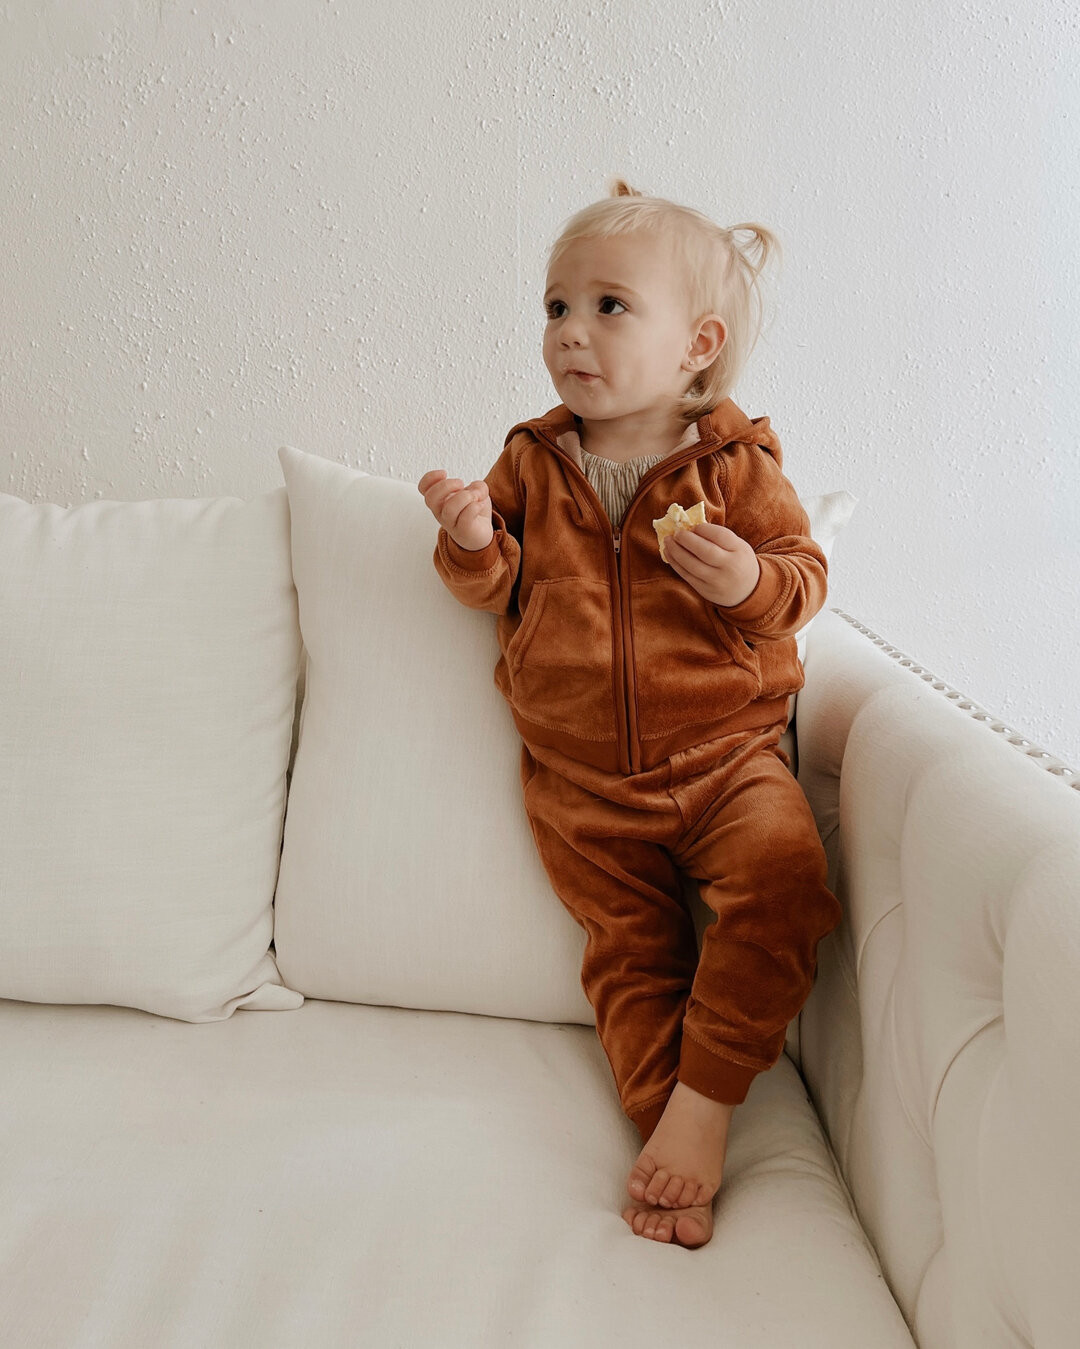 Keep them cozy in the cutest velour jogger set☃️🤍 Baby &amp; Toddler sizes available. 20% off + free polar bear stuffy with purchased! ⠀⠀⠀⠀⠀⠀⠀⠀⠀
⠀⠀⠀⠀⠀⠀⠀⠀⠀
#cozy #babystyle #toddlerstyle #momlife #mustardseedlittles #winterbabyfashion #motherhood #mo